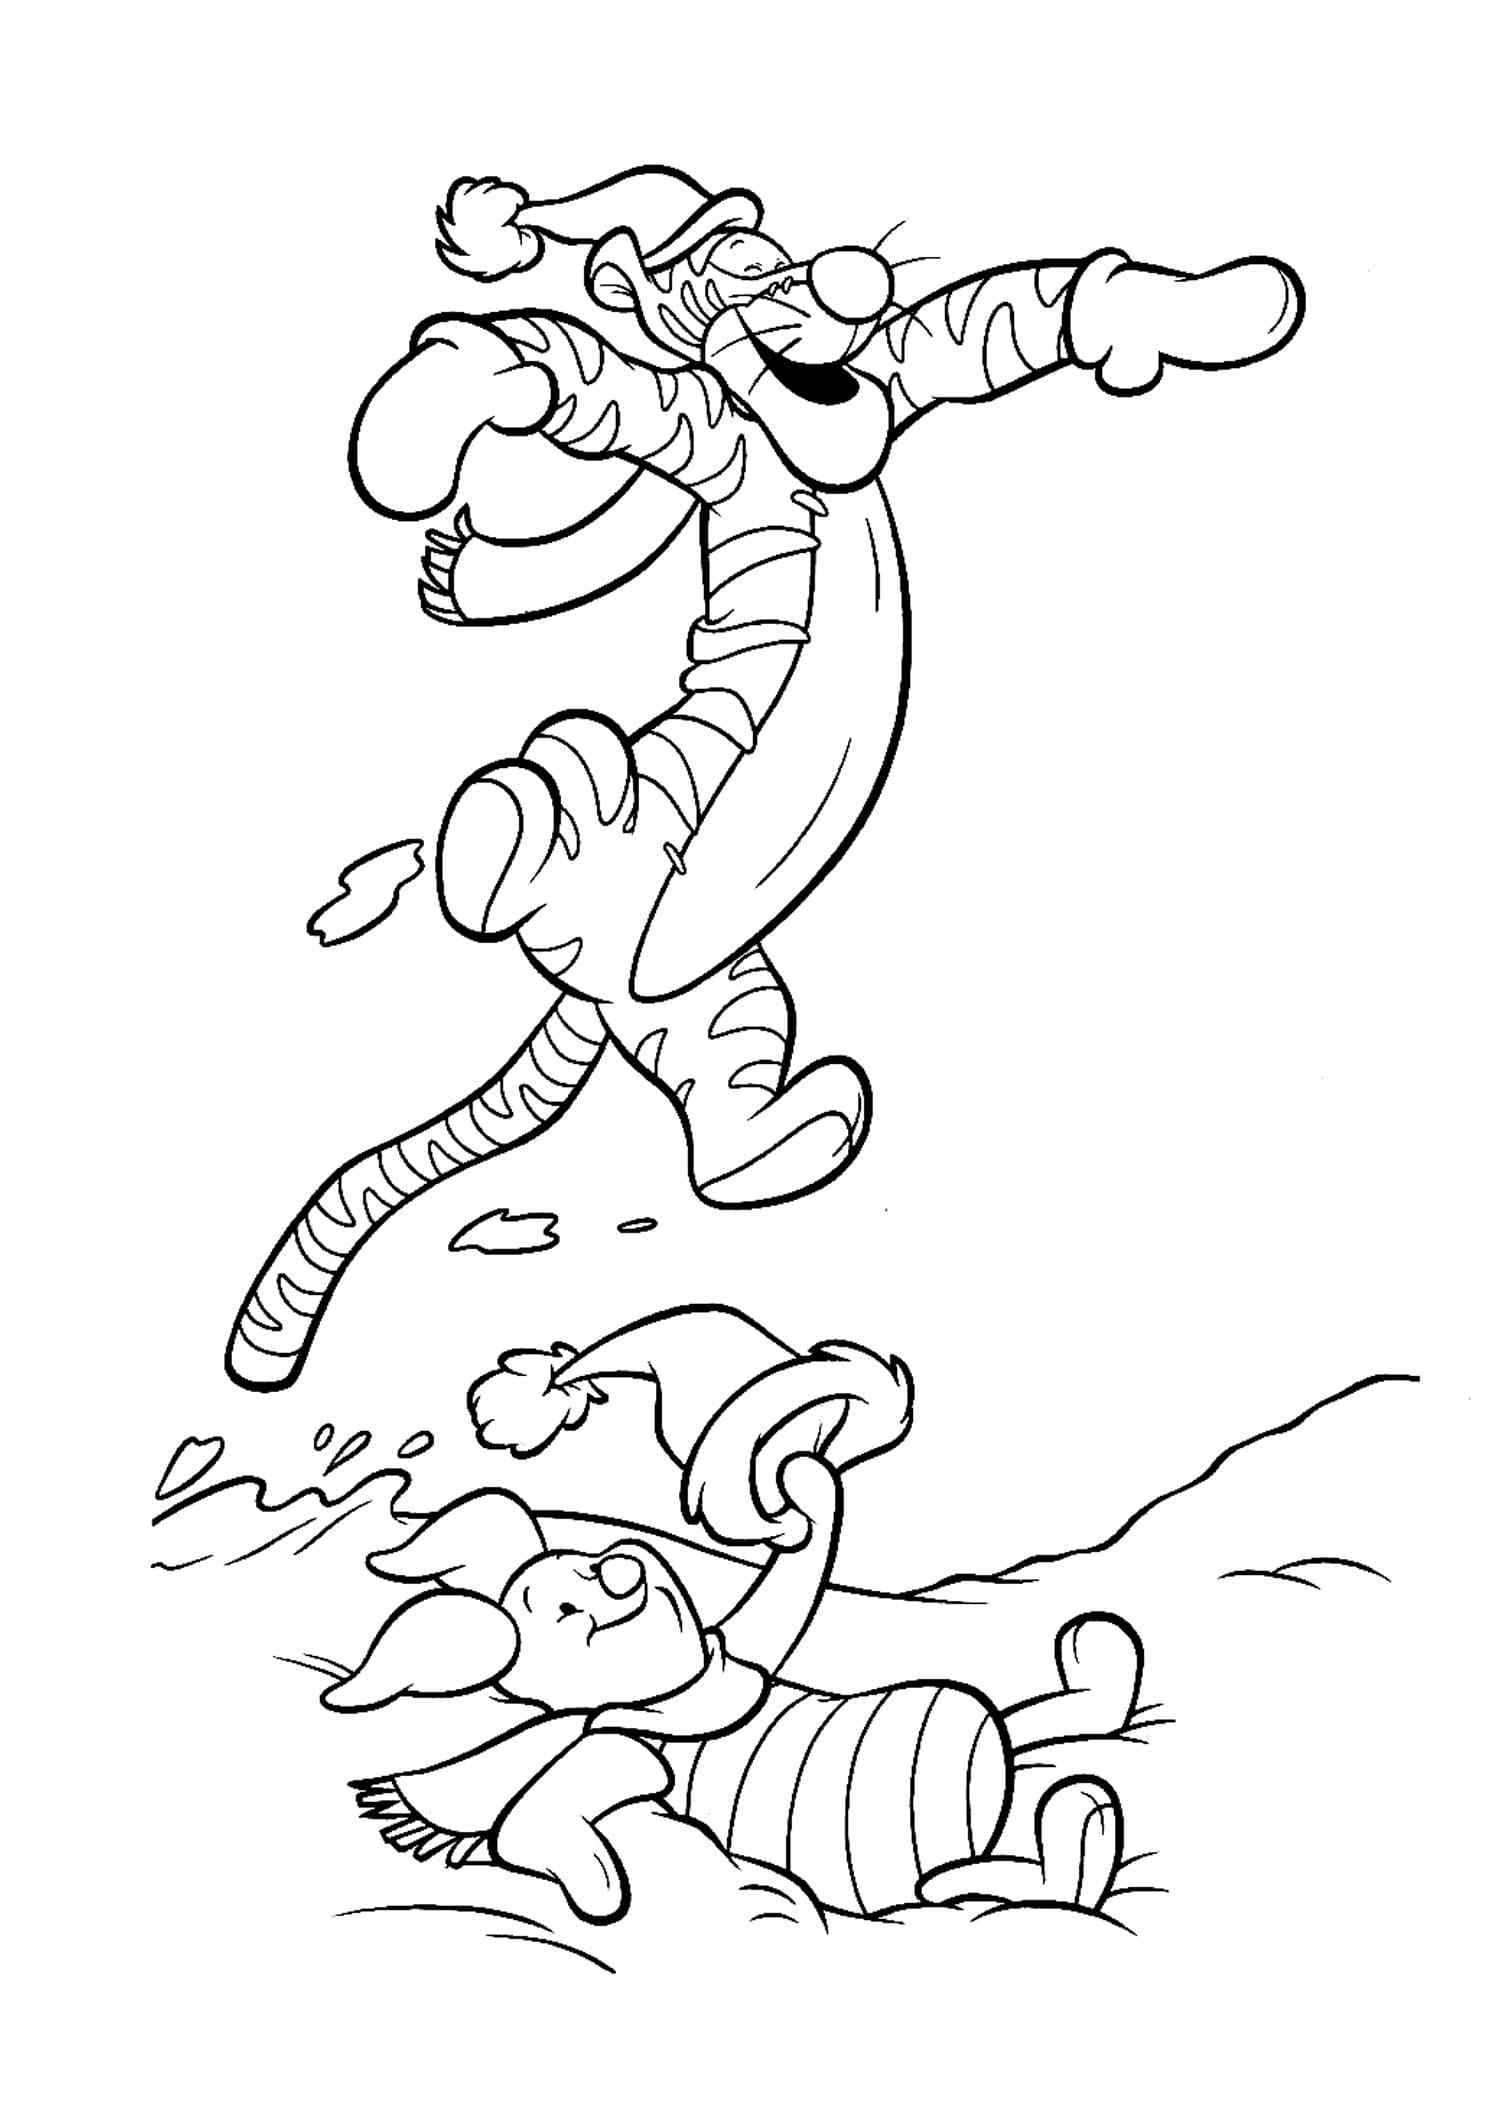 Everyone Is Happy For Christmas Coloring Page